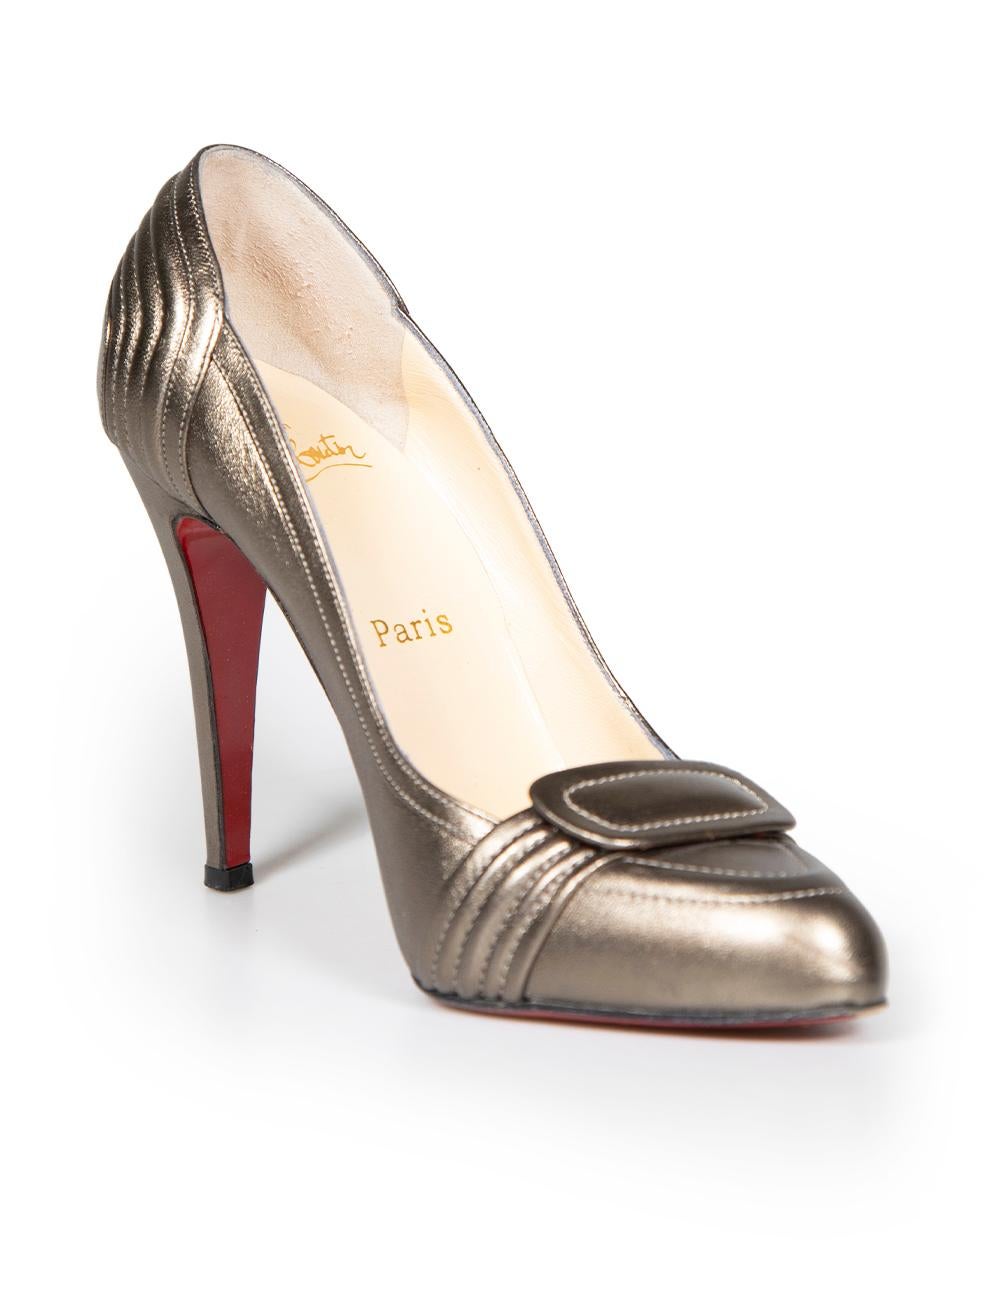 CONDITION is Good. Minor wear to pumps is evident. Light wear to the uppers with a handful of small abrasions found around the toe box and heels. Mild abrasion is also seen through the outsoles on this used Christian Louboutin designer resale item.
